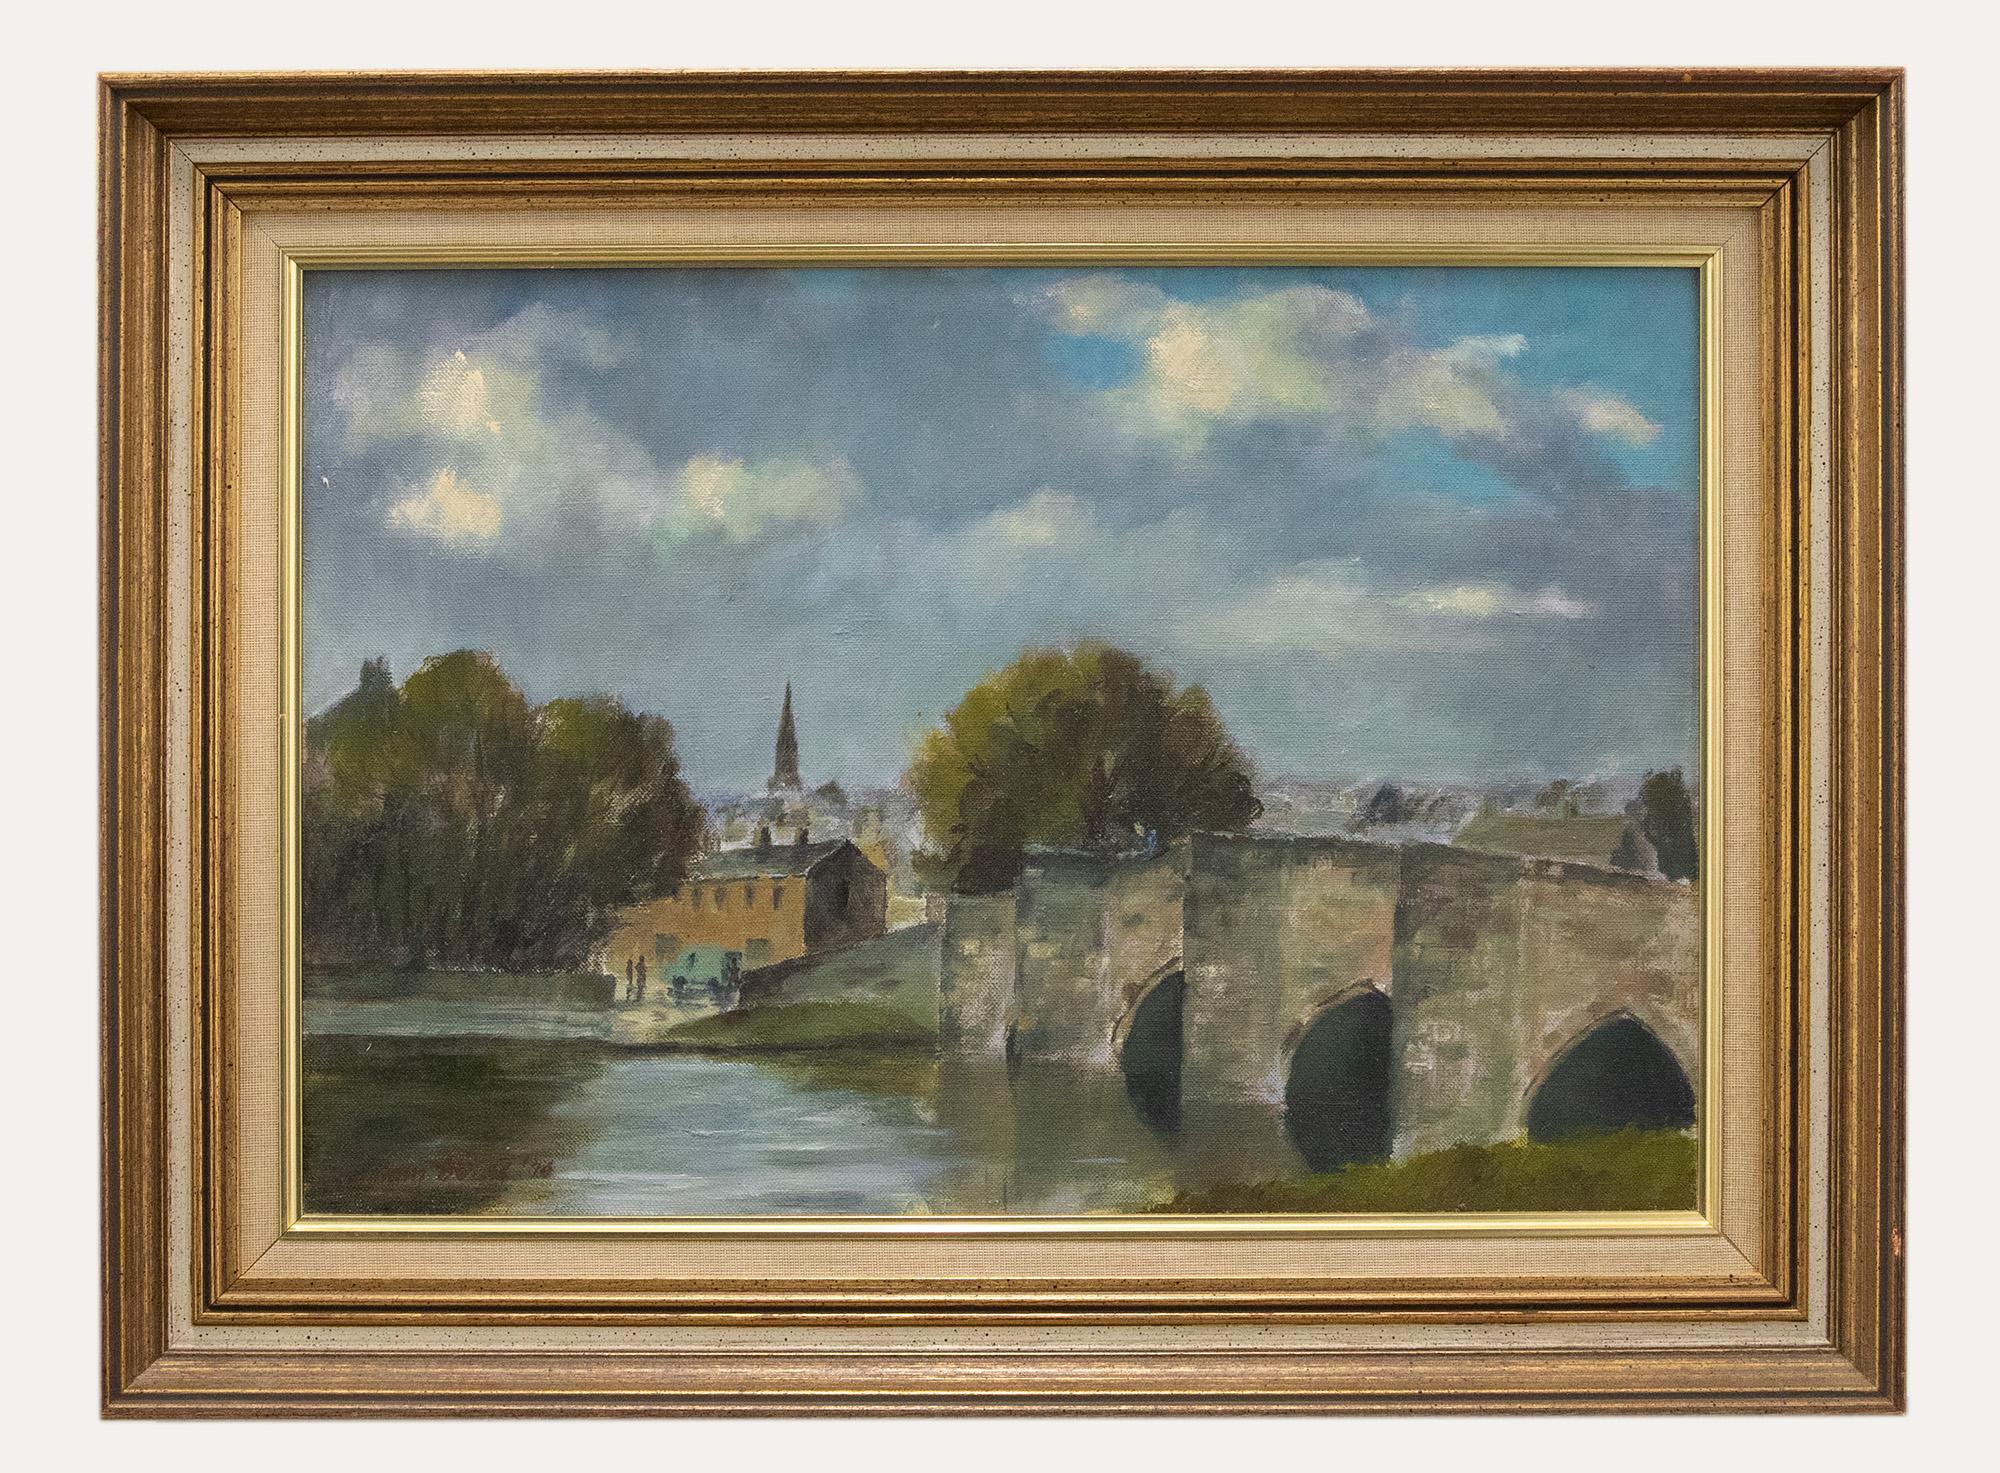 The delightful oil captures the pretty market town of Bakewell, situated on the banks of the river Wye. The Bakewell Bridge can be seen stretched across the river to the foreground with a figure resting on its high walls. The composition has been